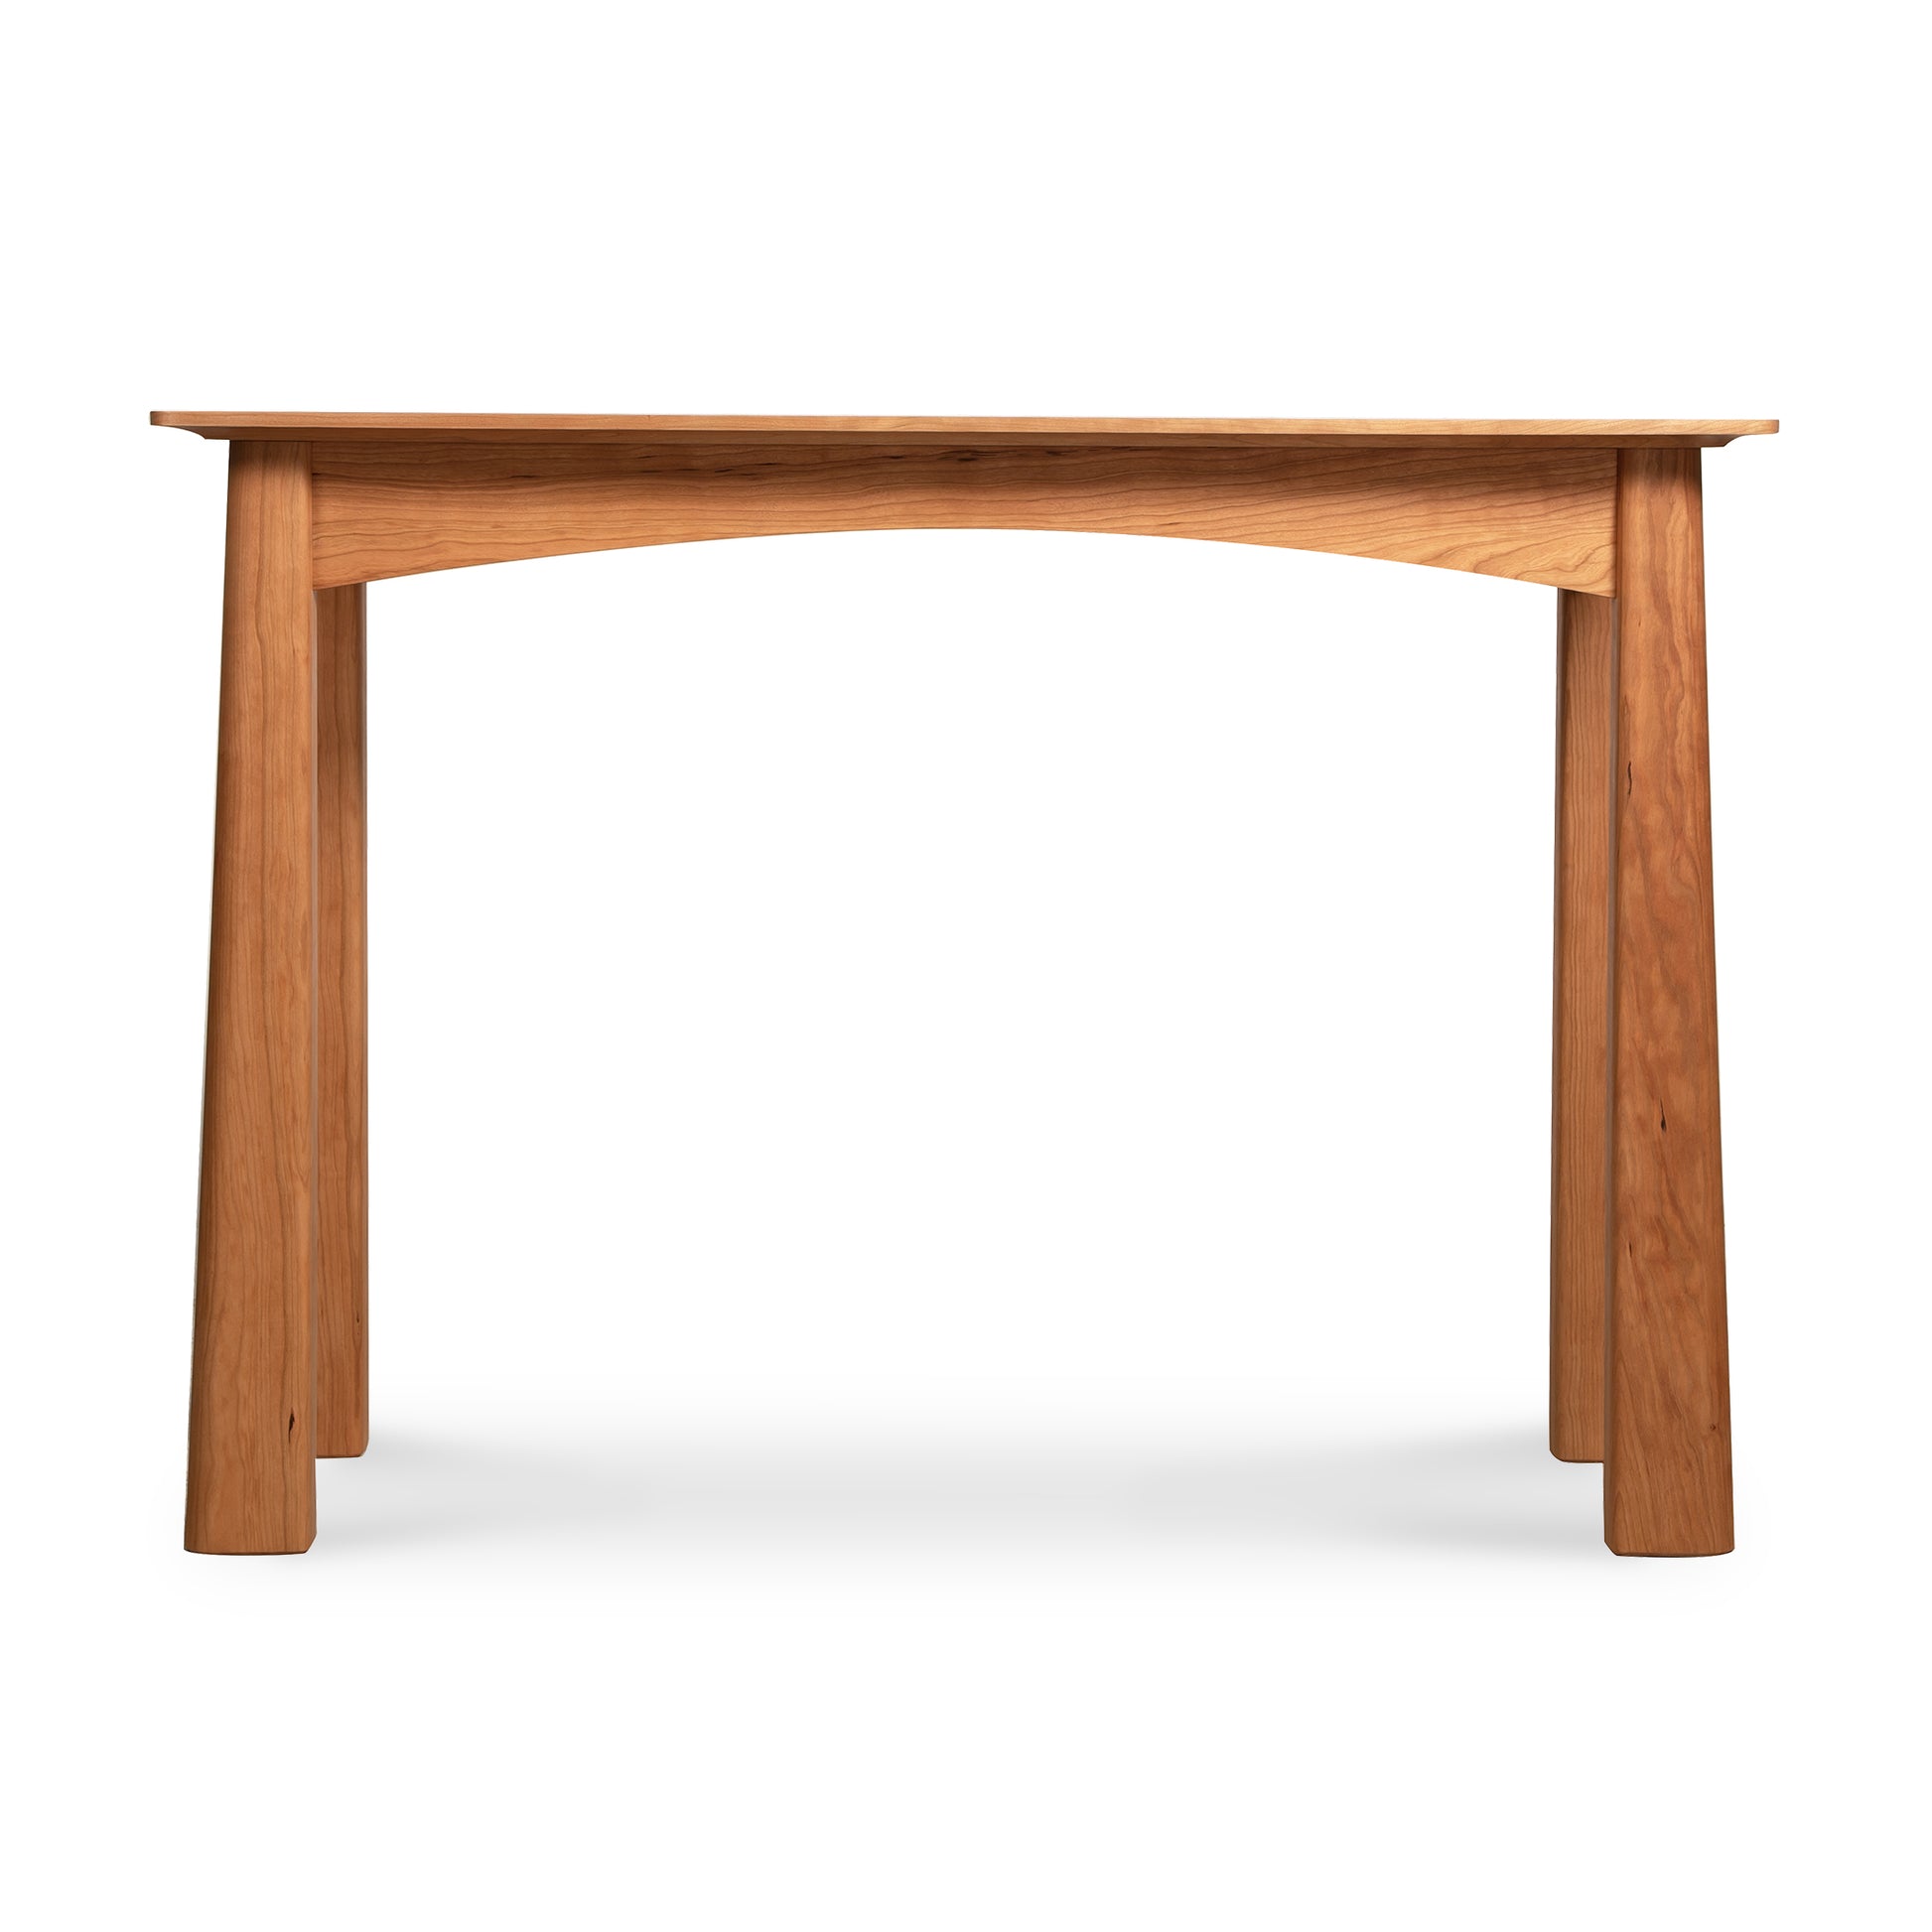 A simple American-made Cherry Moon Sofa Table from Maple Corner Woodworks with a smooth tabletop and sturdy, slightly tapered legs, isolated on a white background.